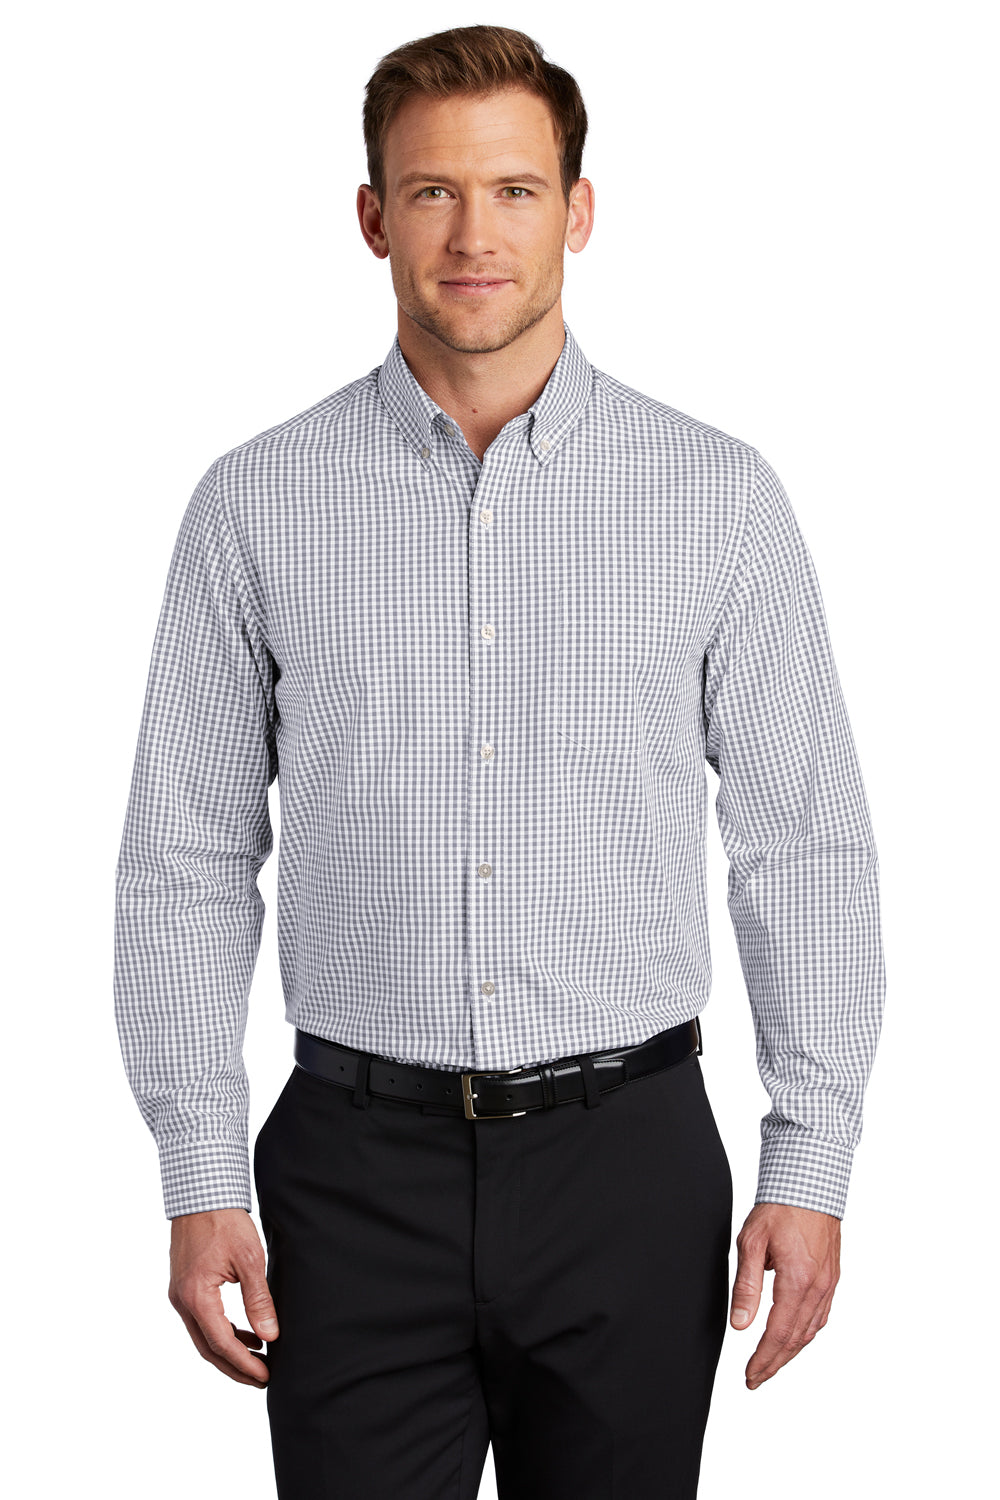 Port Authority Mens Broadcloth Gingham Long Sleeve Button Down Shirt w/ Pocket Gusty Grey/White Front